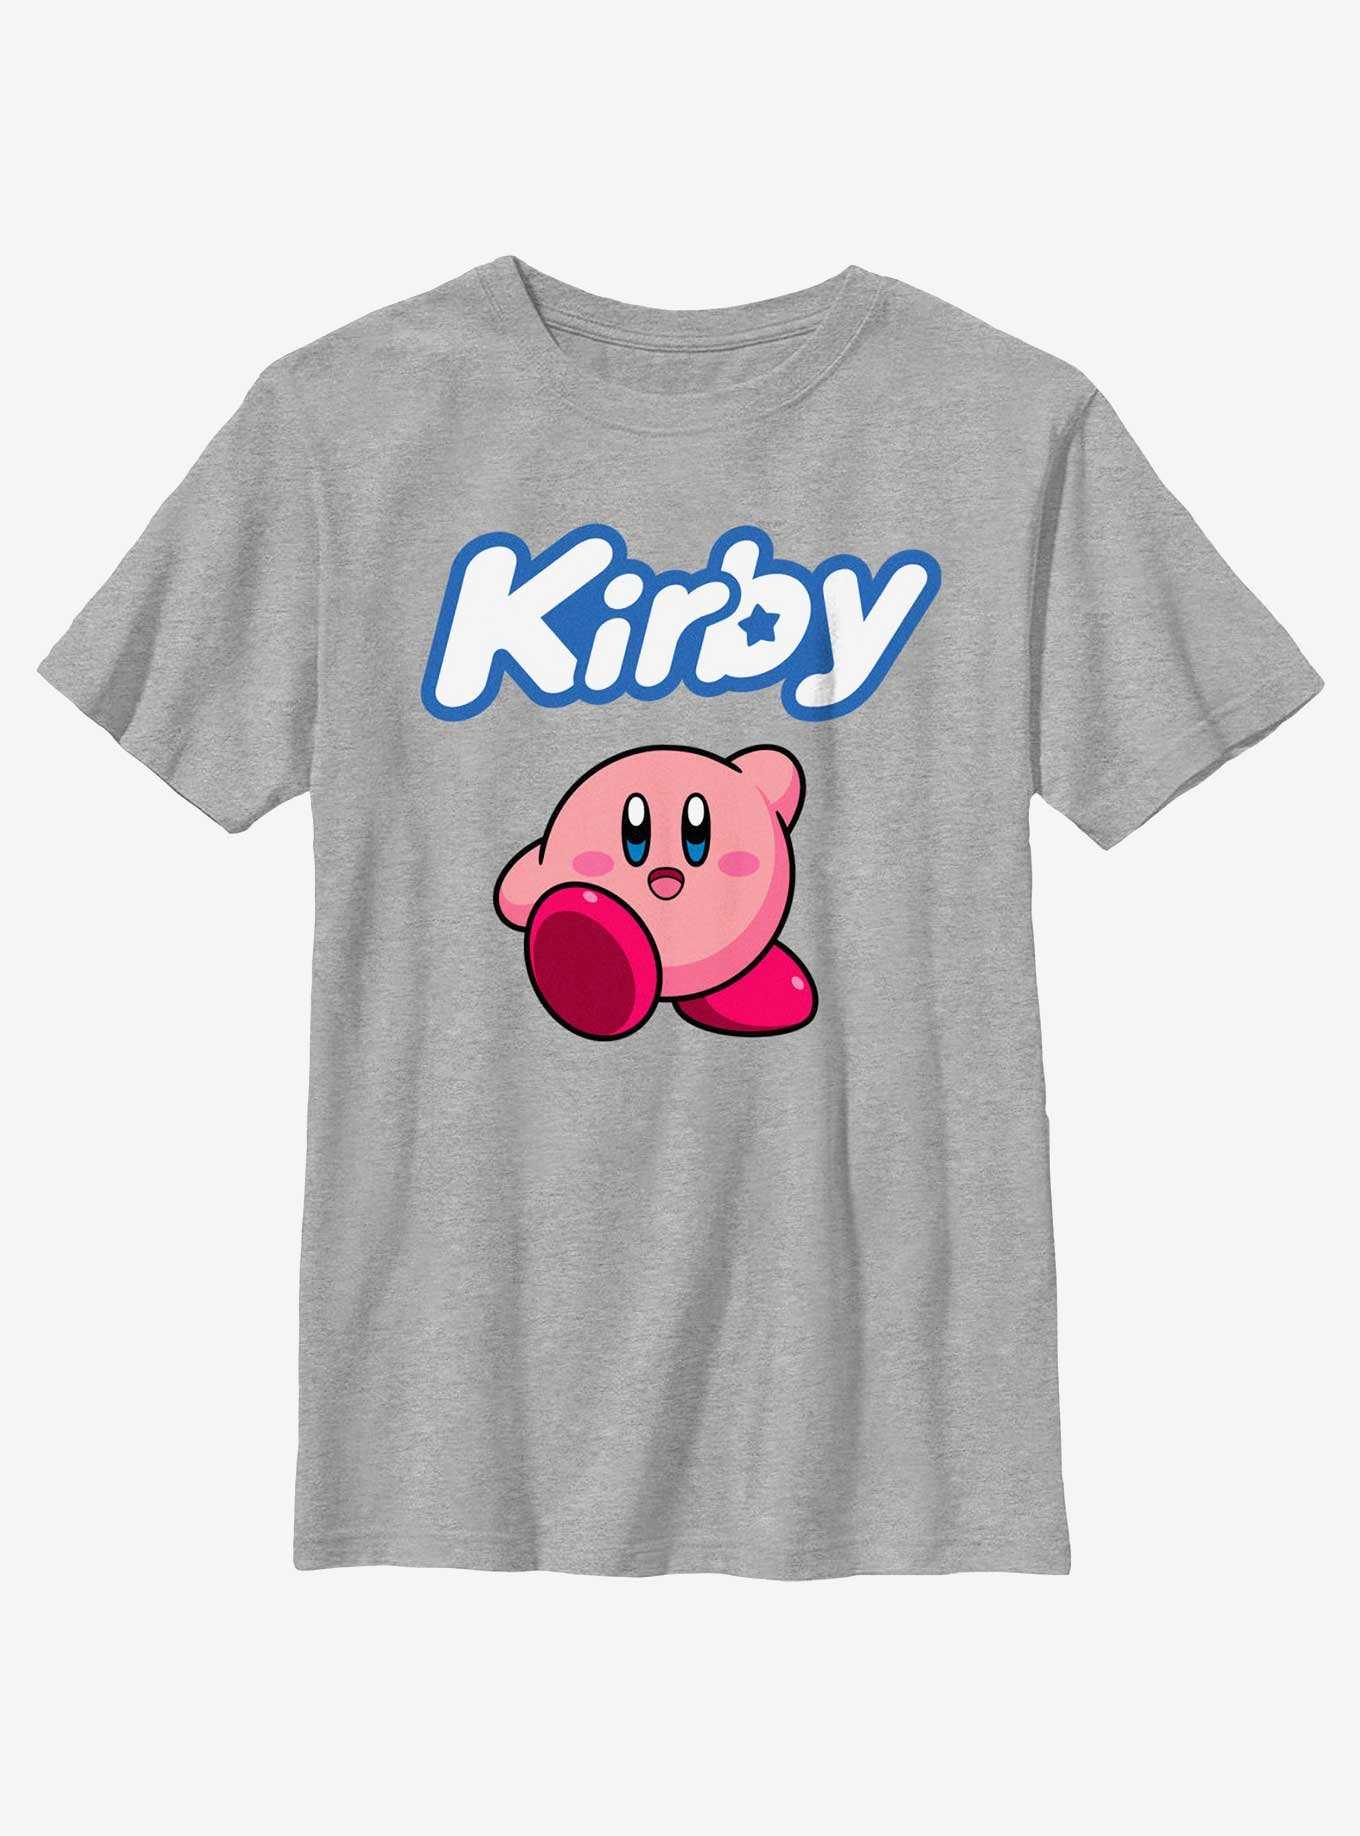 Kirby Simply Kirby Youth T-Shirt, , hi-res